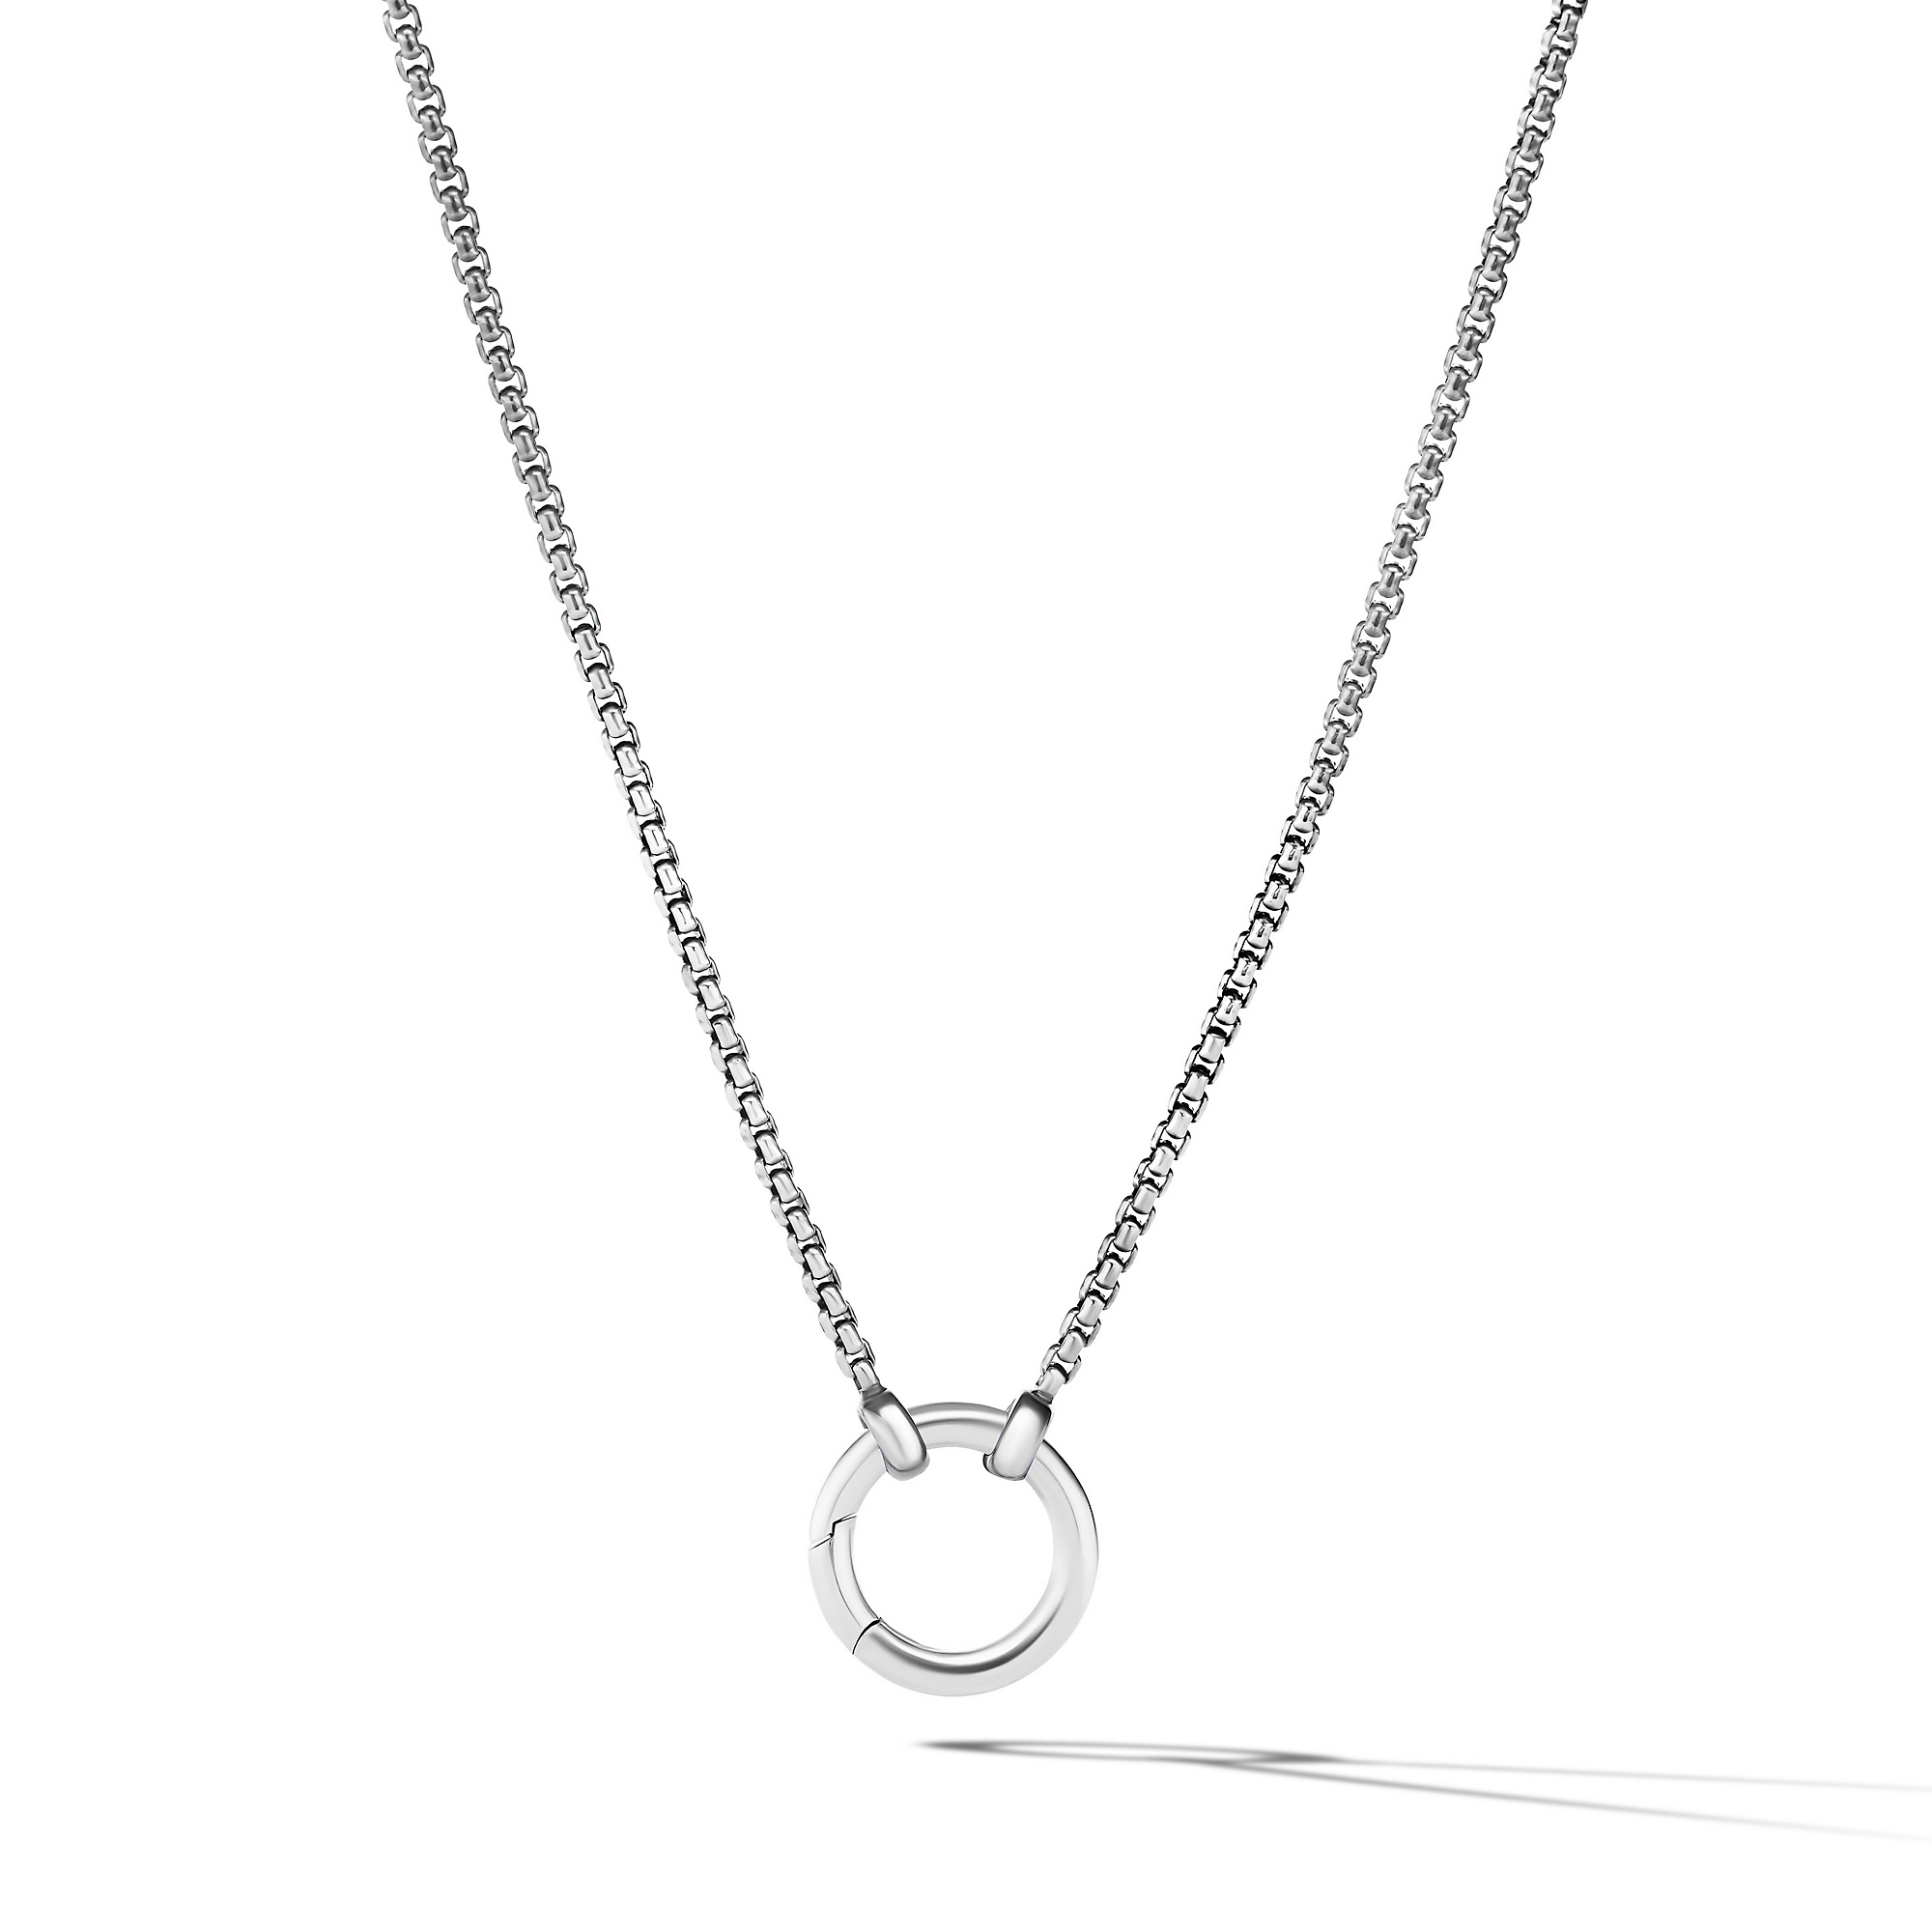 Smooth Amulet Vehicle Box Chain Necklace in Sterling Silver